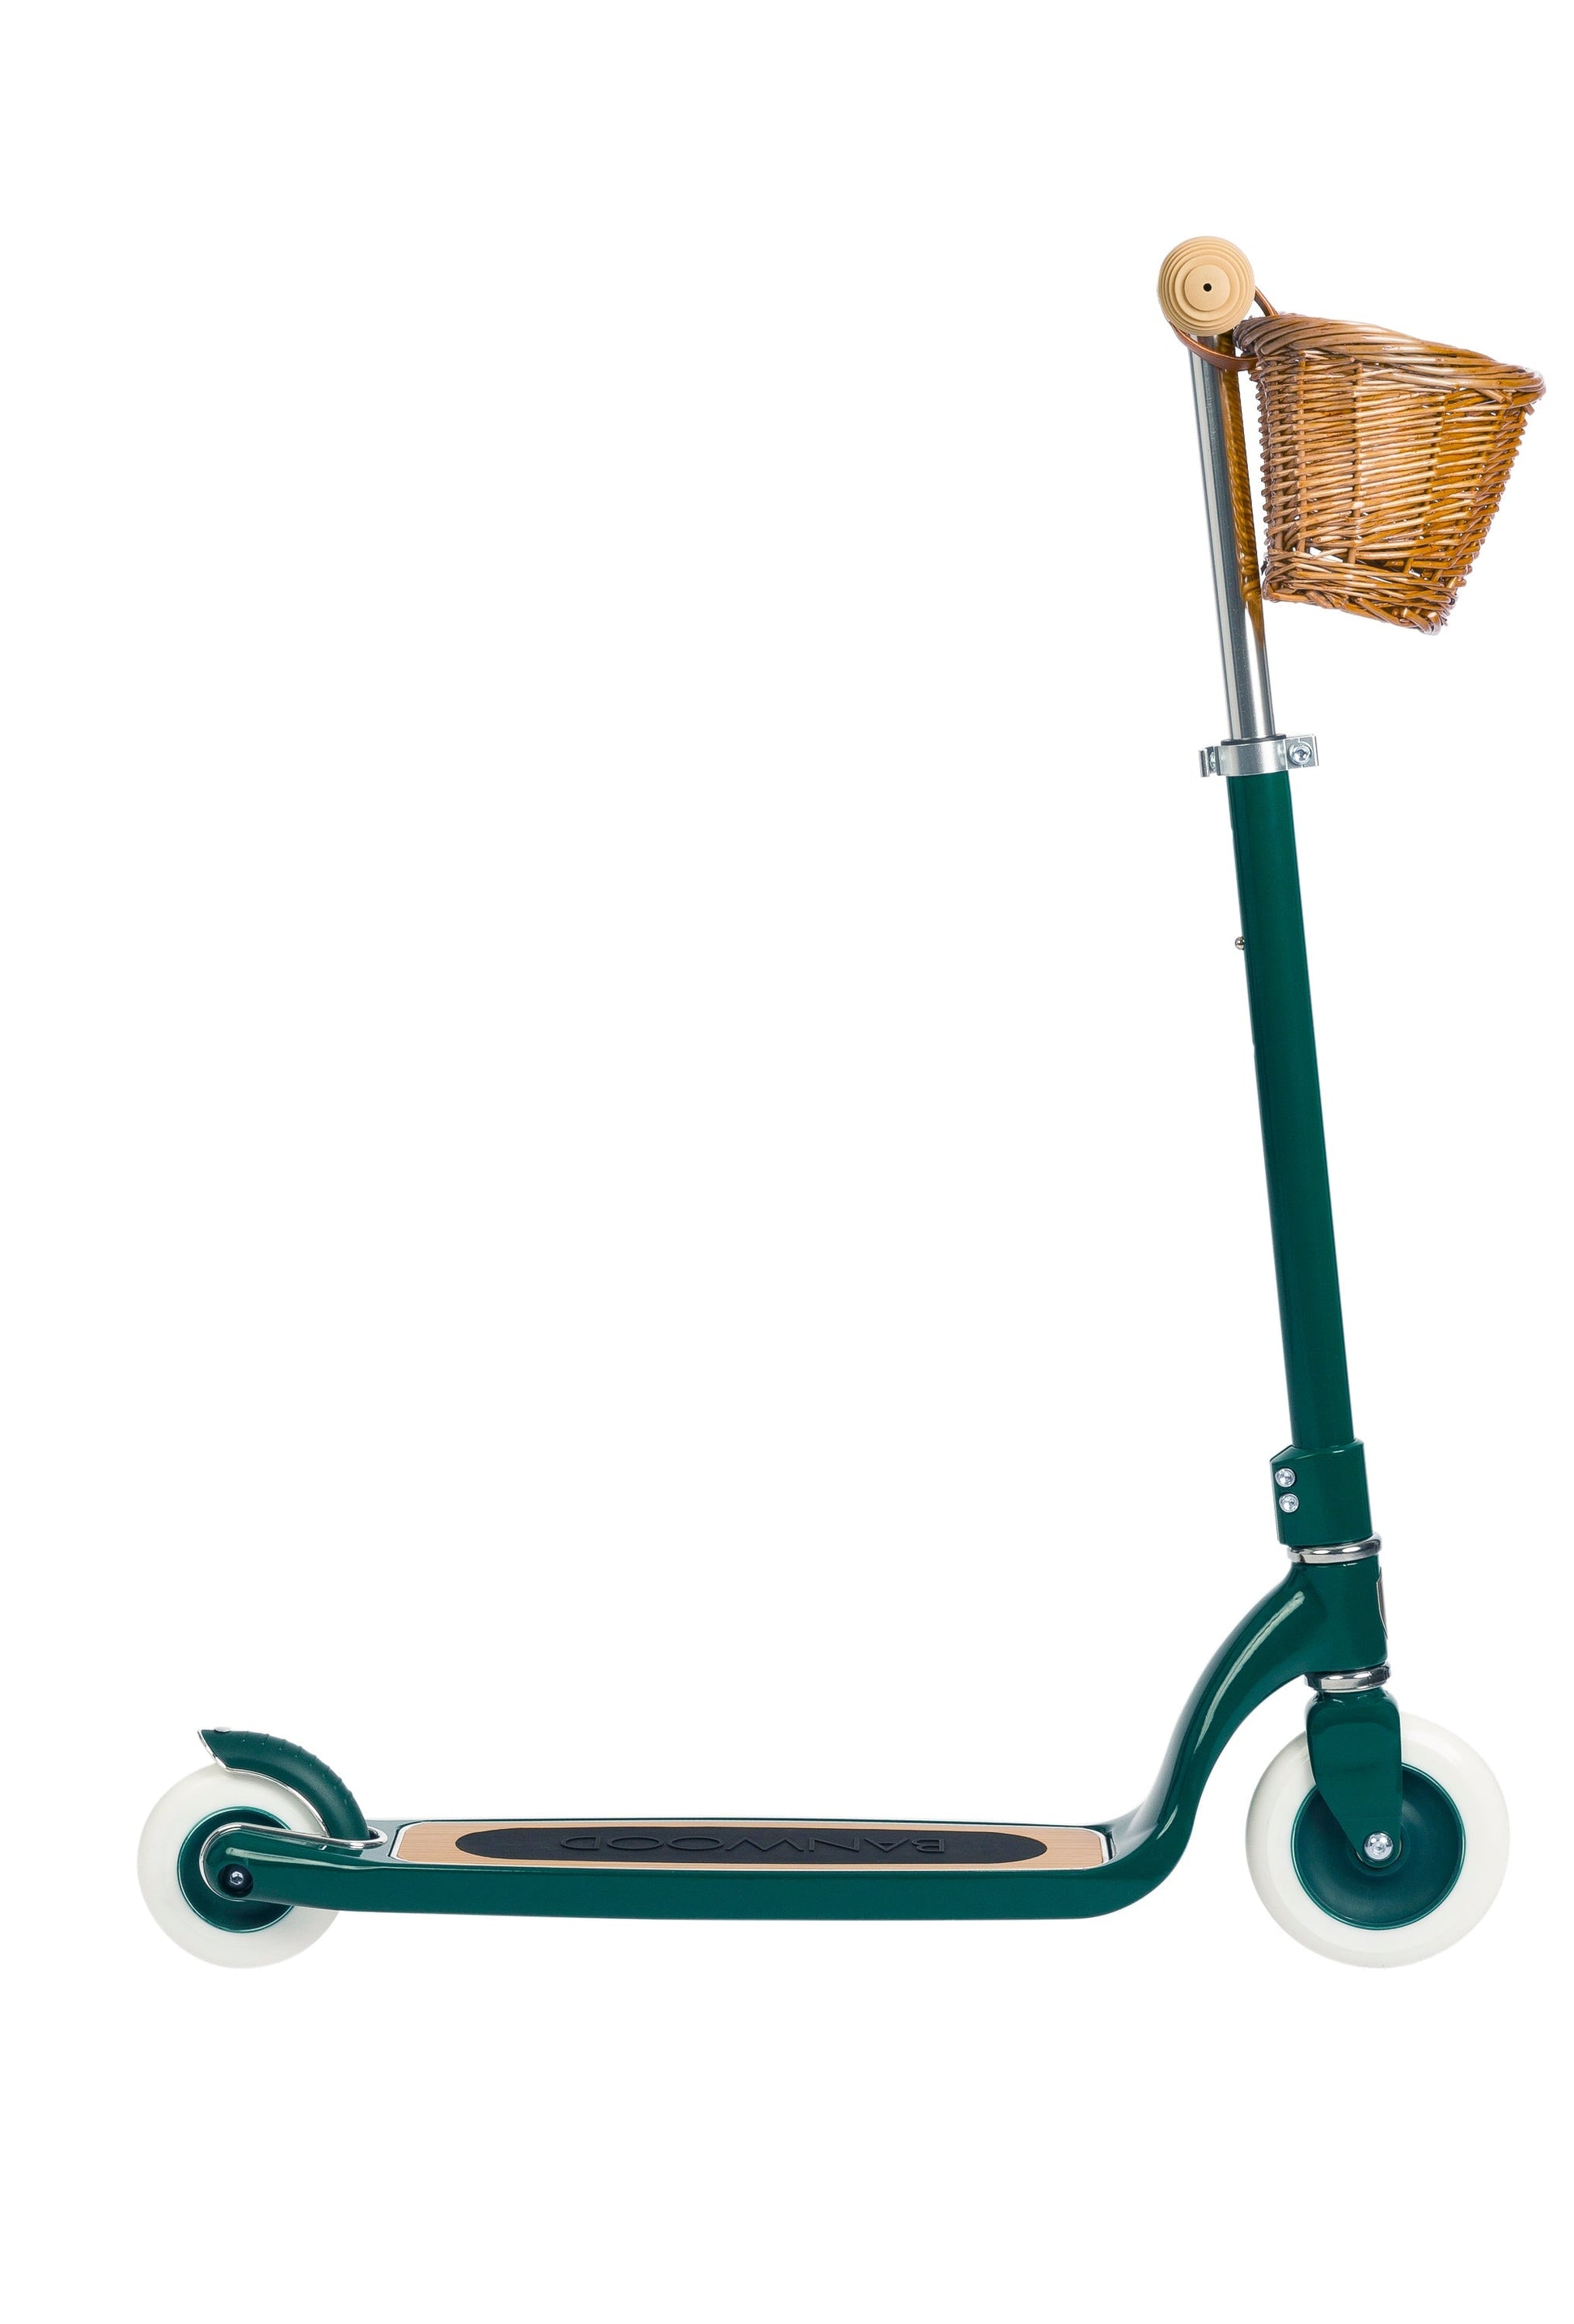 Banwood Maxi Scooter, Ages 6+ yrs - Alder & Alouette